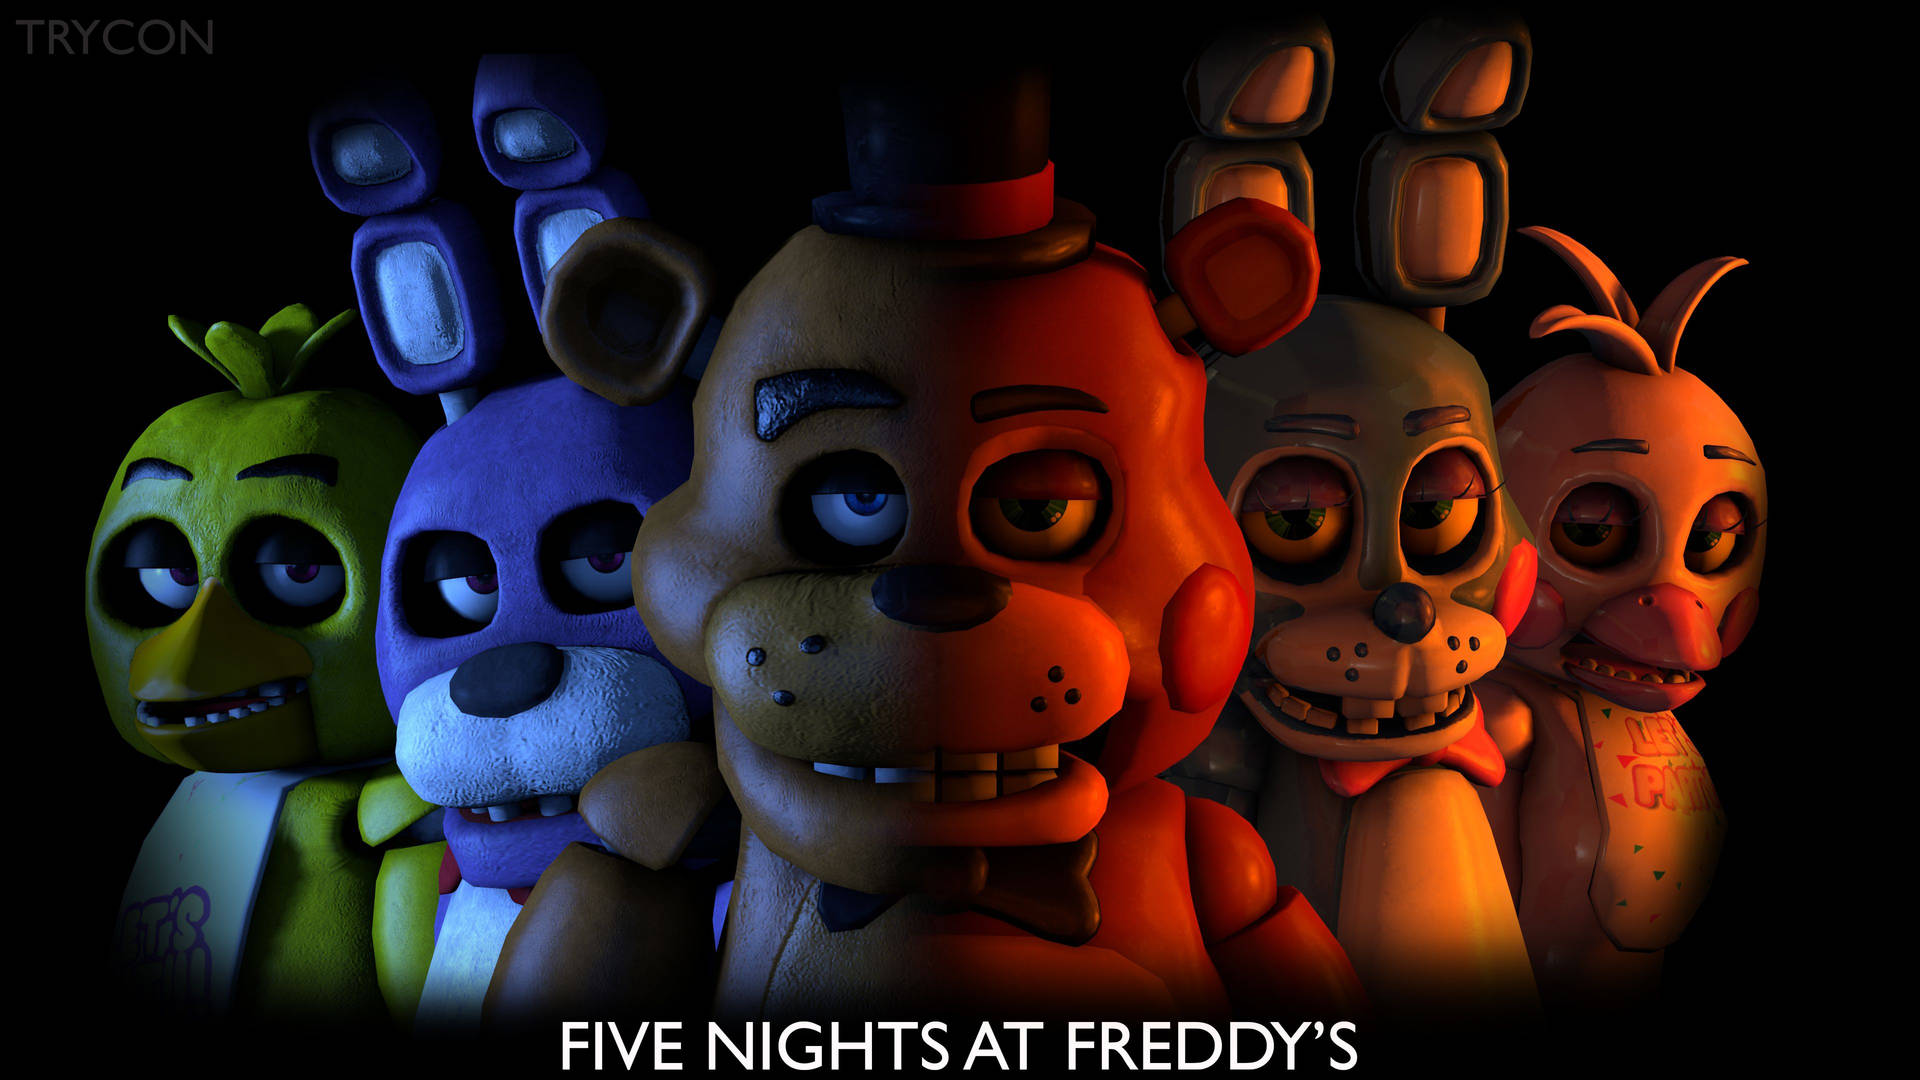 A Creepy Combination of Classic and Toy FNAF Wallpaper